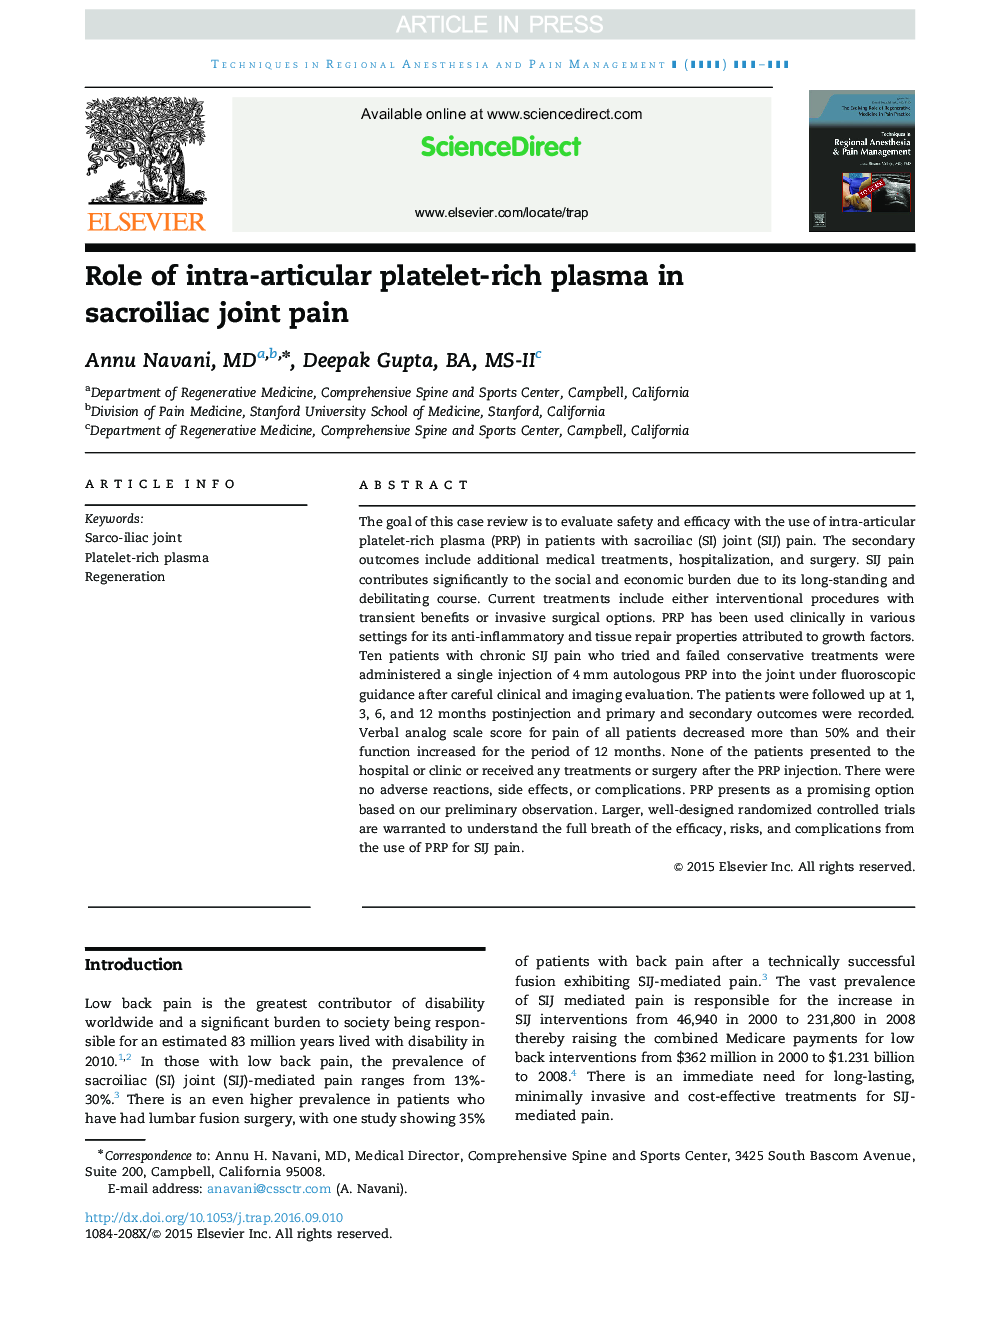 Role of intra-articular platelet-rich plasma in sacroiliac joint pain